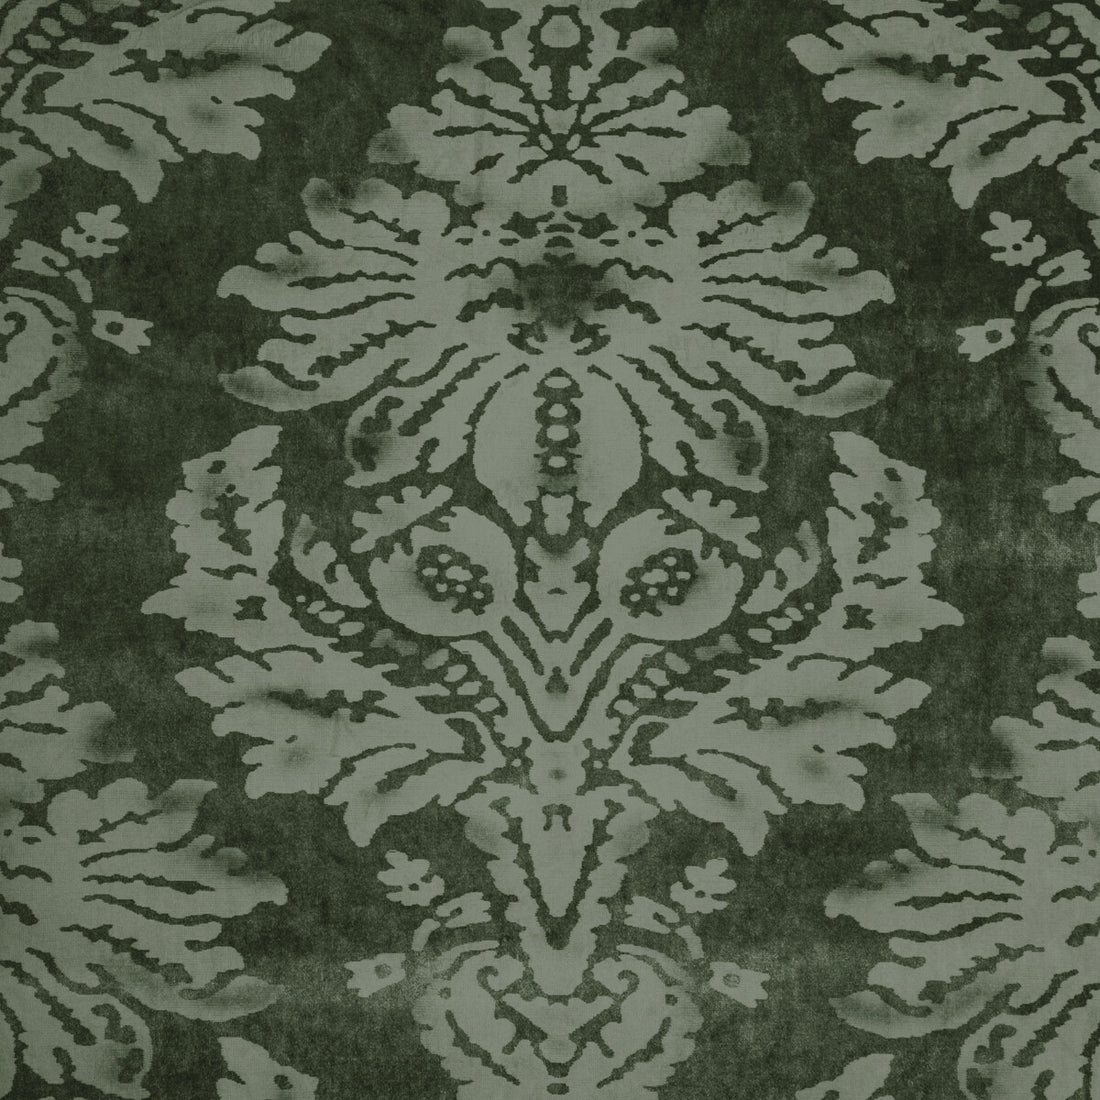 Parham Velvet fabric in loden color - pattern 2023111.30.0 - by Lee Jofa in the Barwick Velvets collection